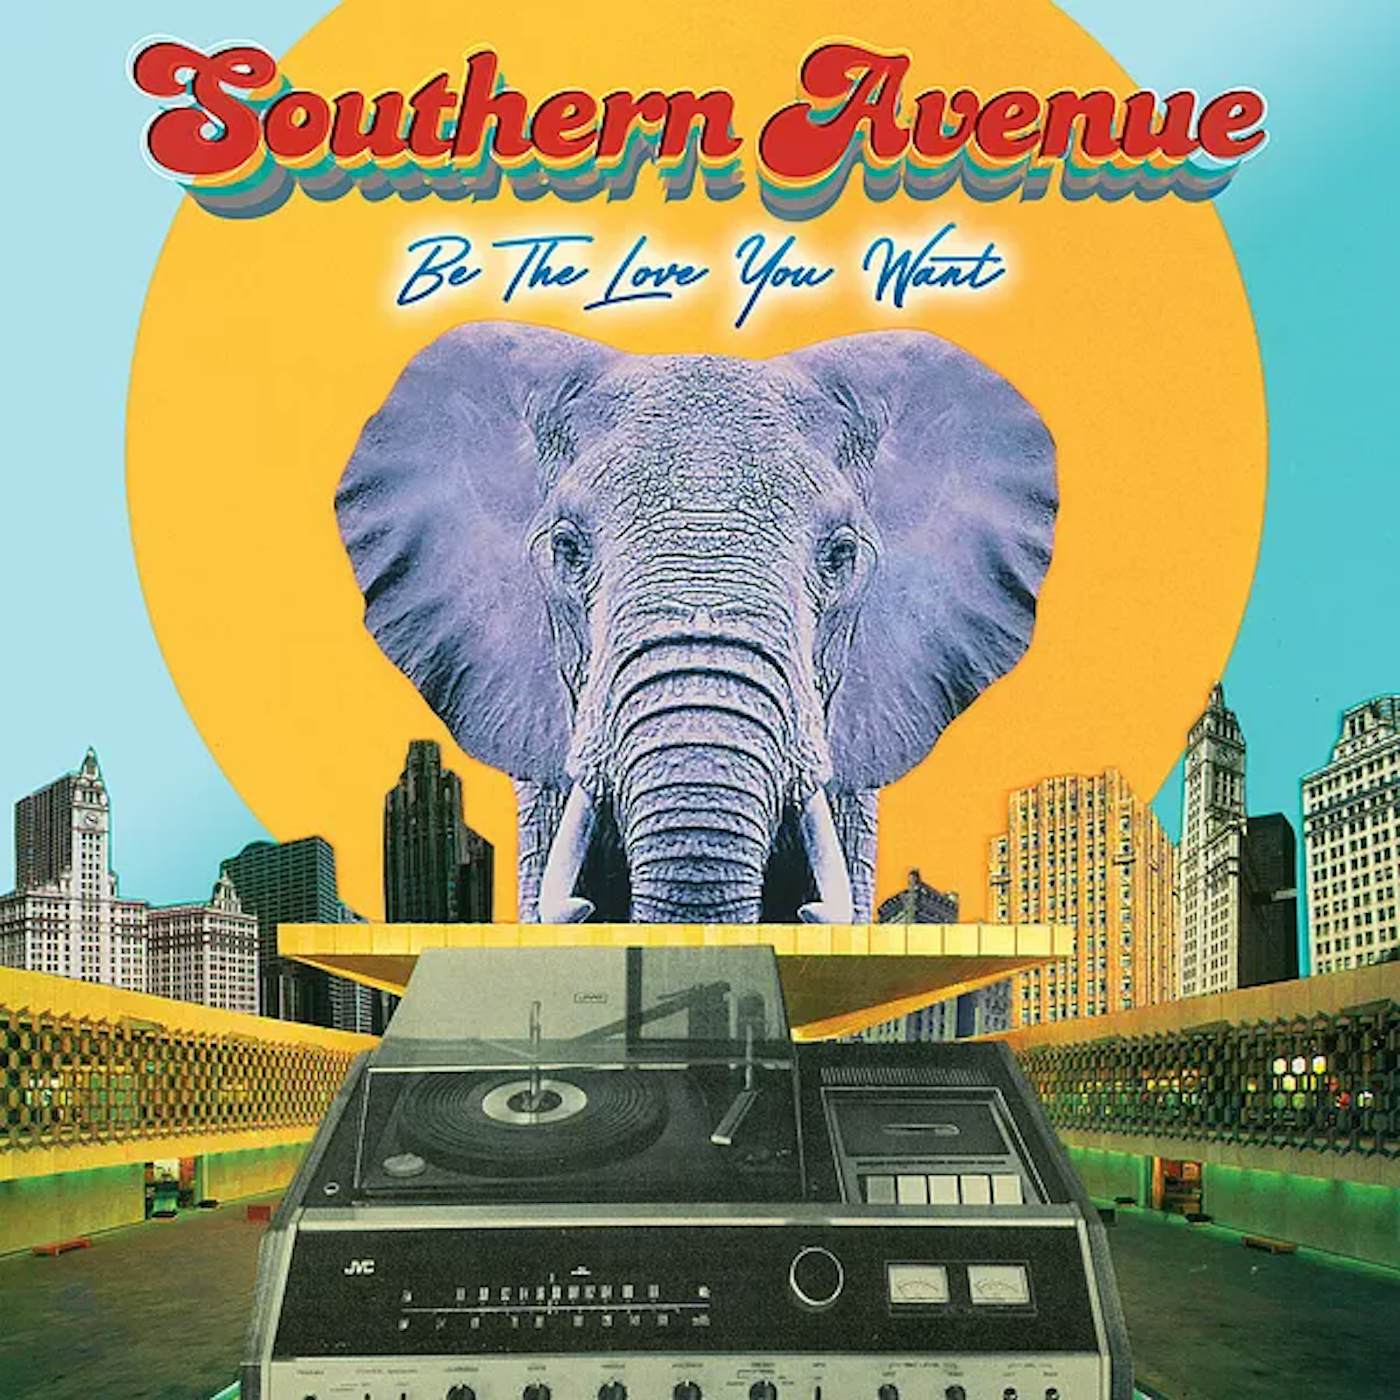 Southern Avenue Be The Love You Want Vinyl Record